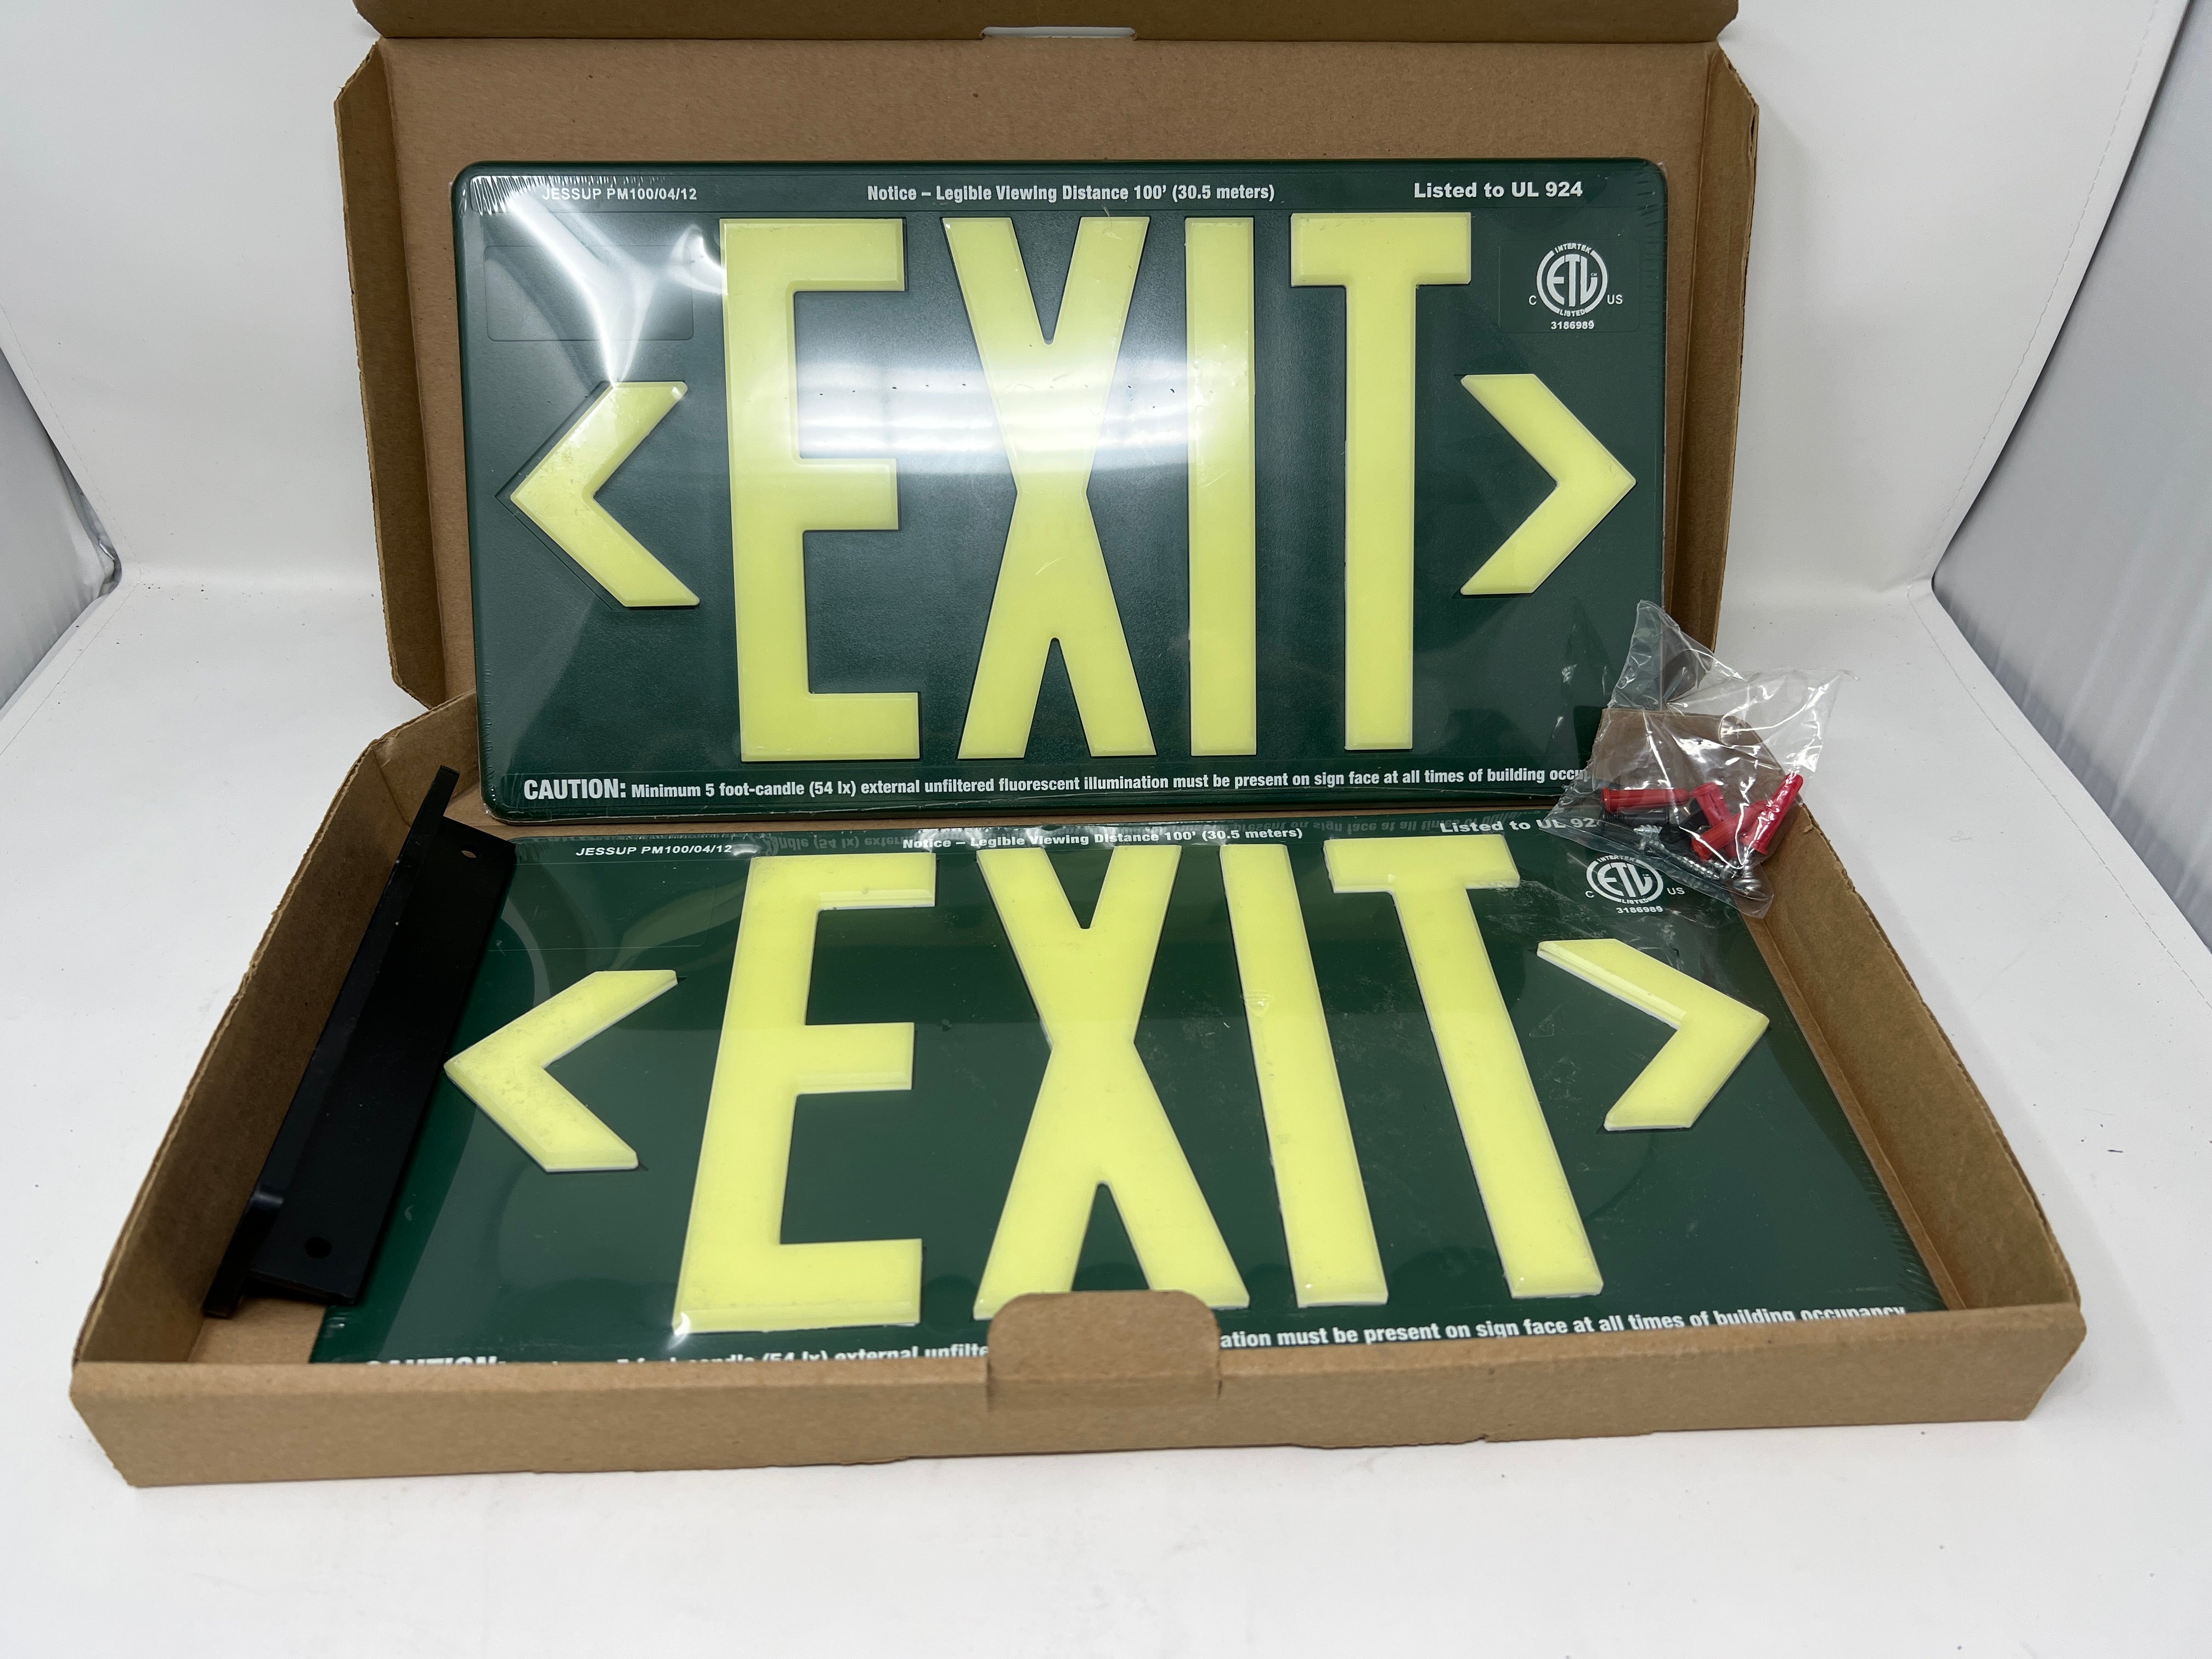 NEW OLD STOCK - OPEN BOX - SPECIAL OFFER - 90% Off - Glo Brite 7082-B Photoluminescent Double Sided Directional Exit Sign - PM100 Green - See Description & Images